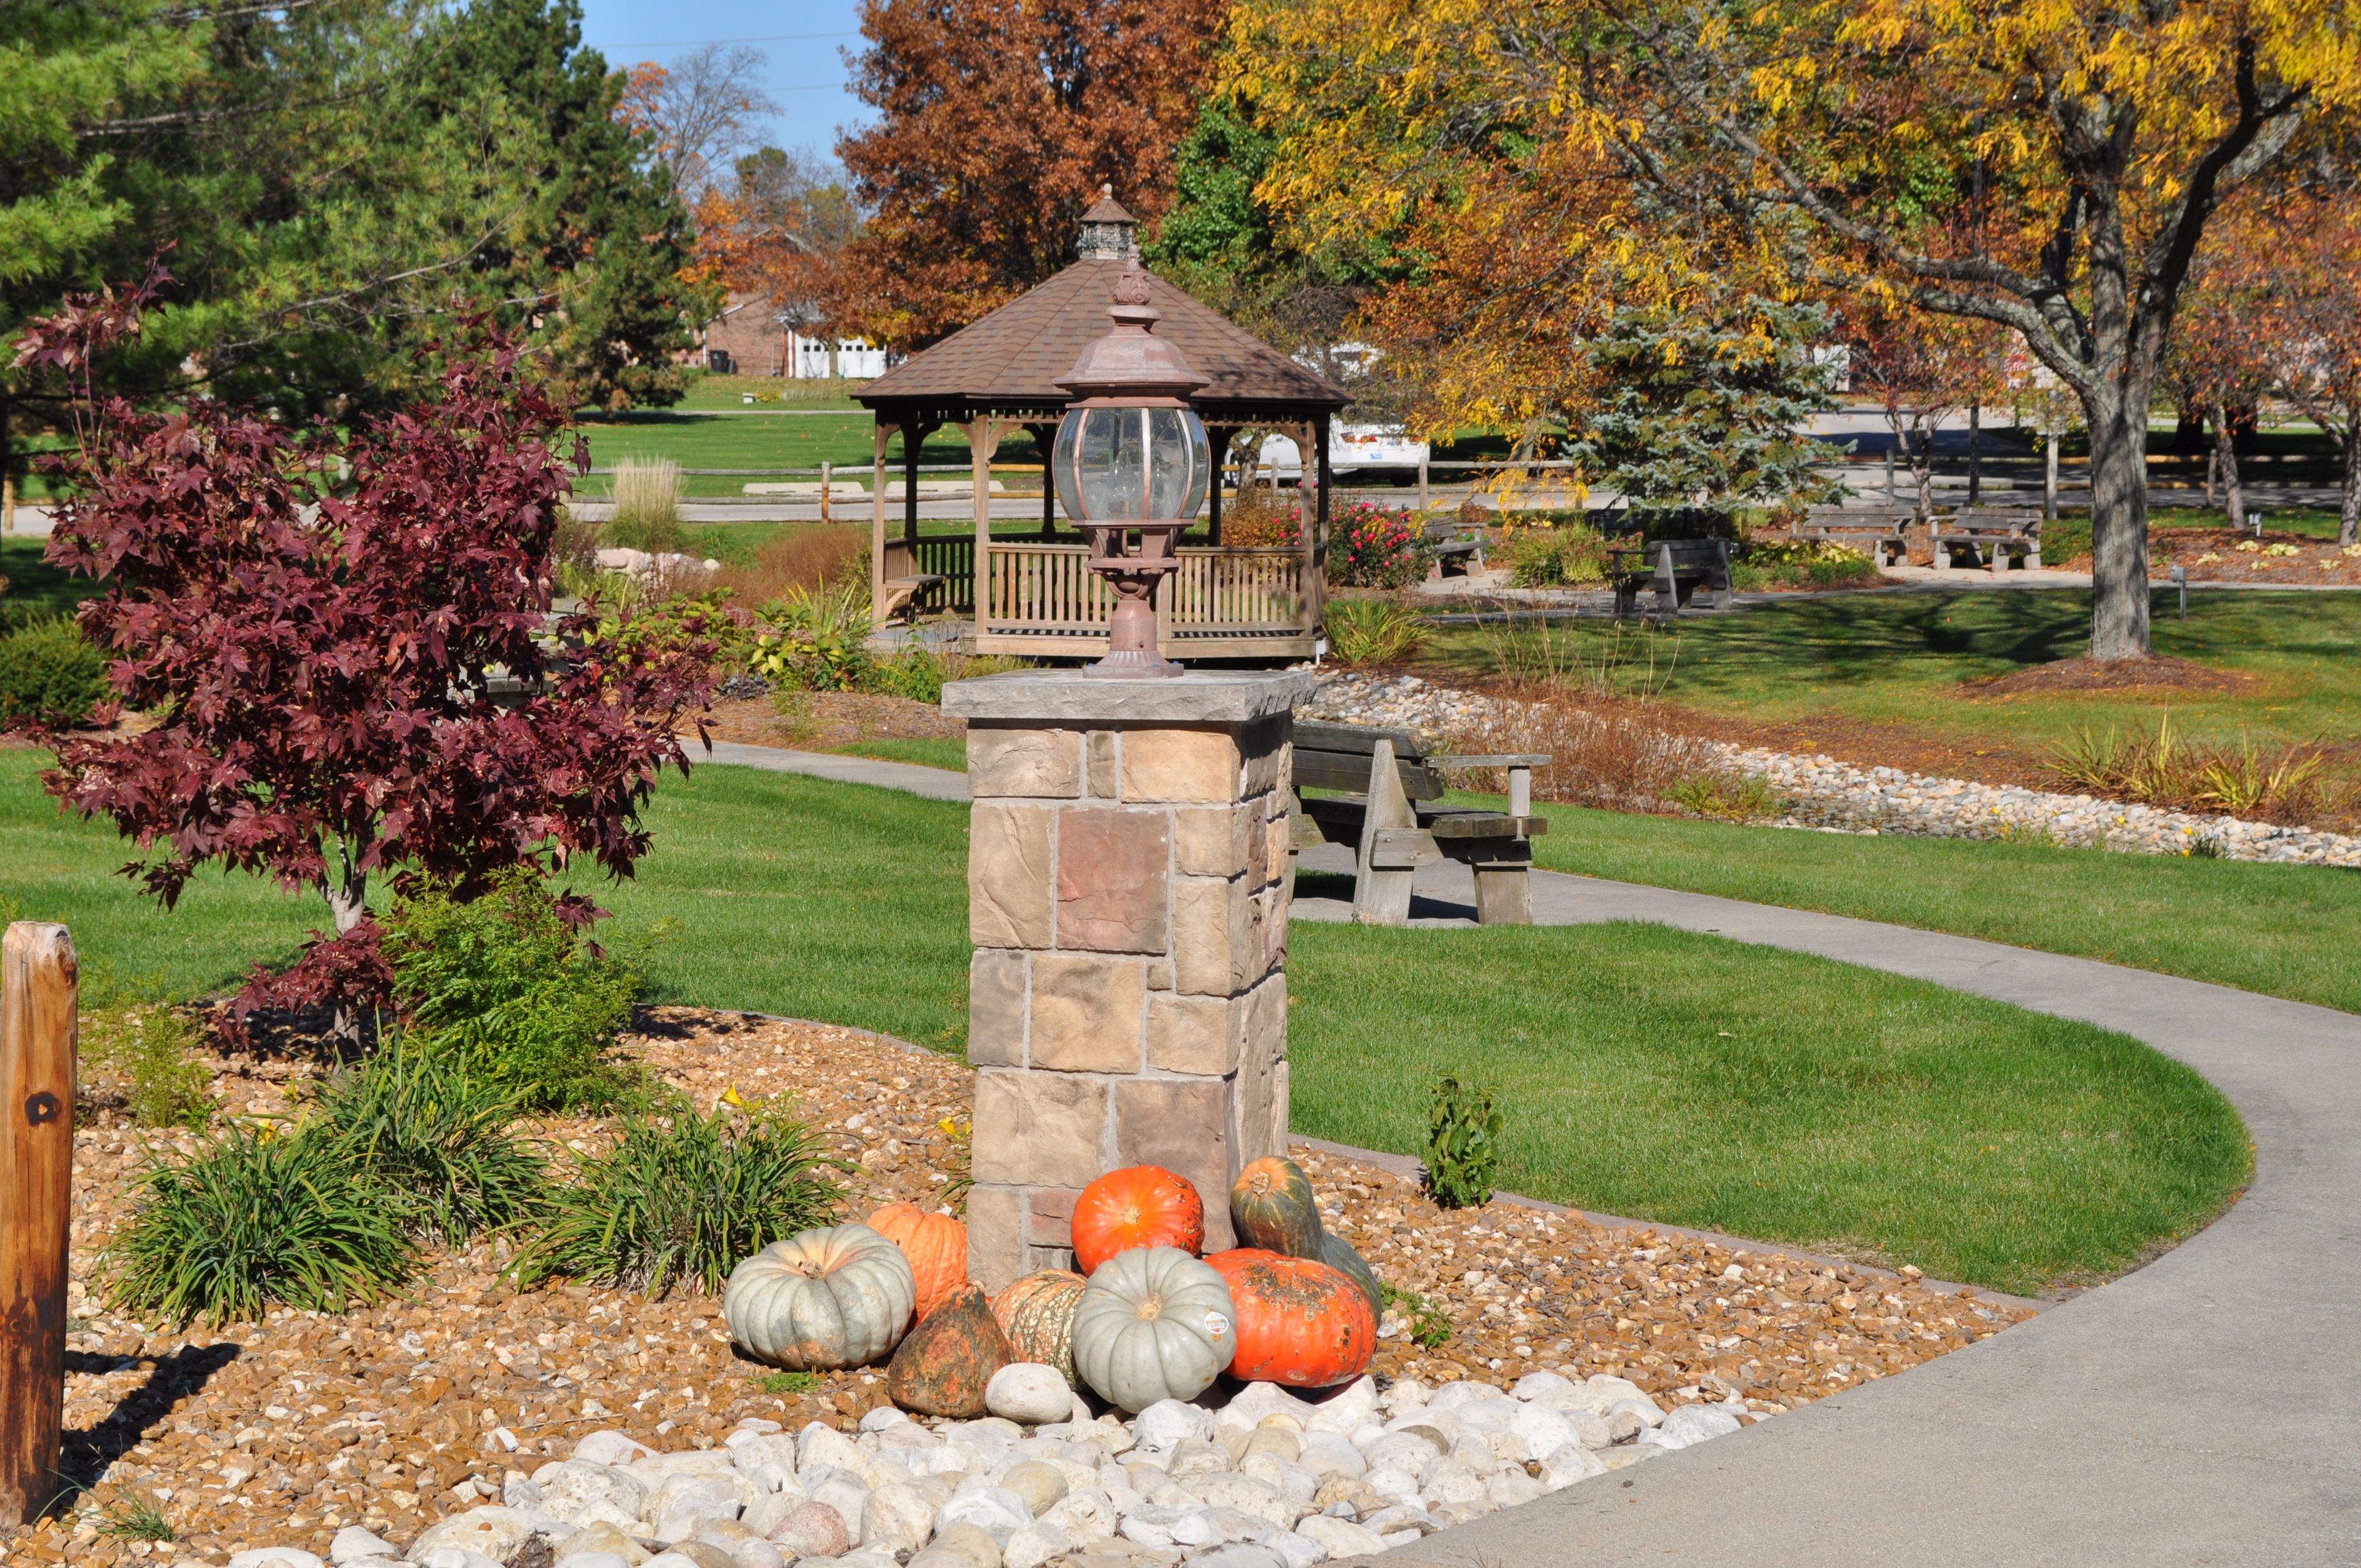 Senior living at Westminster Village with lush greenery, park benches, walking paths, and pumpkin patch.